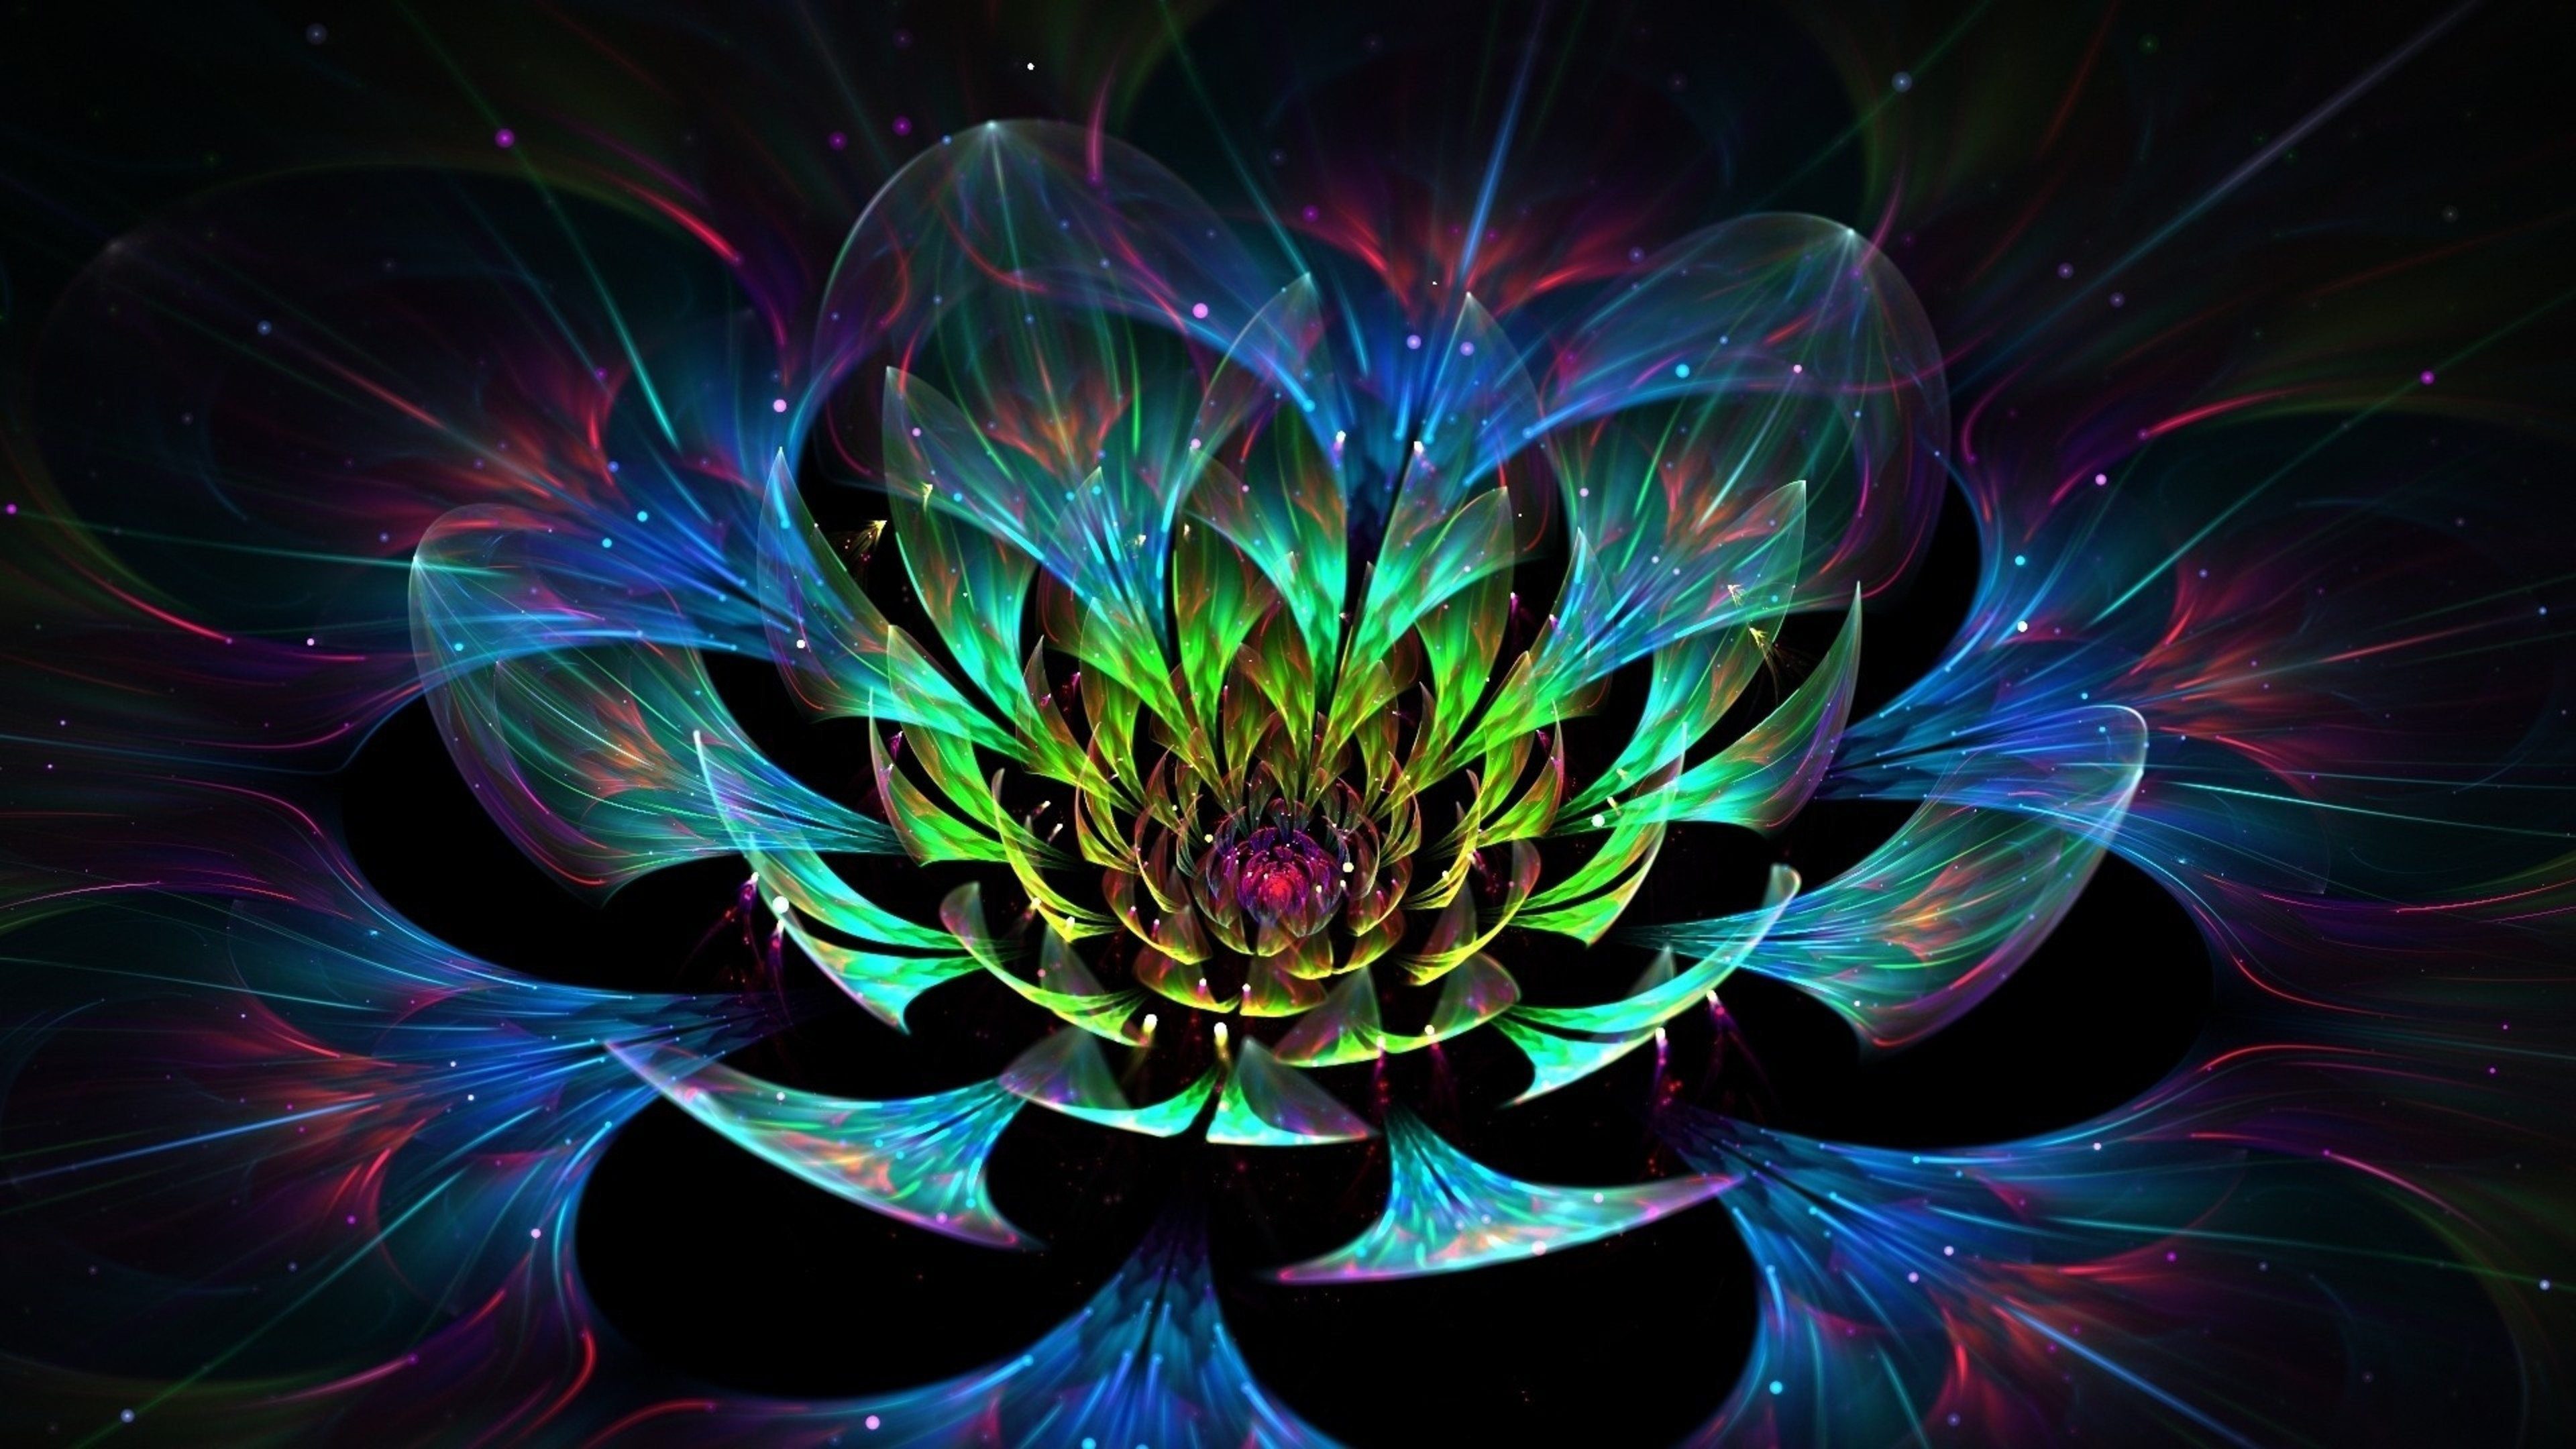 Abstract Lotus Flower